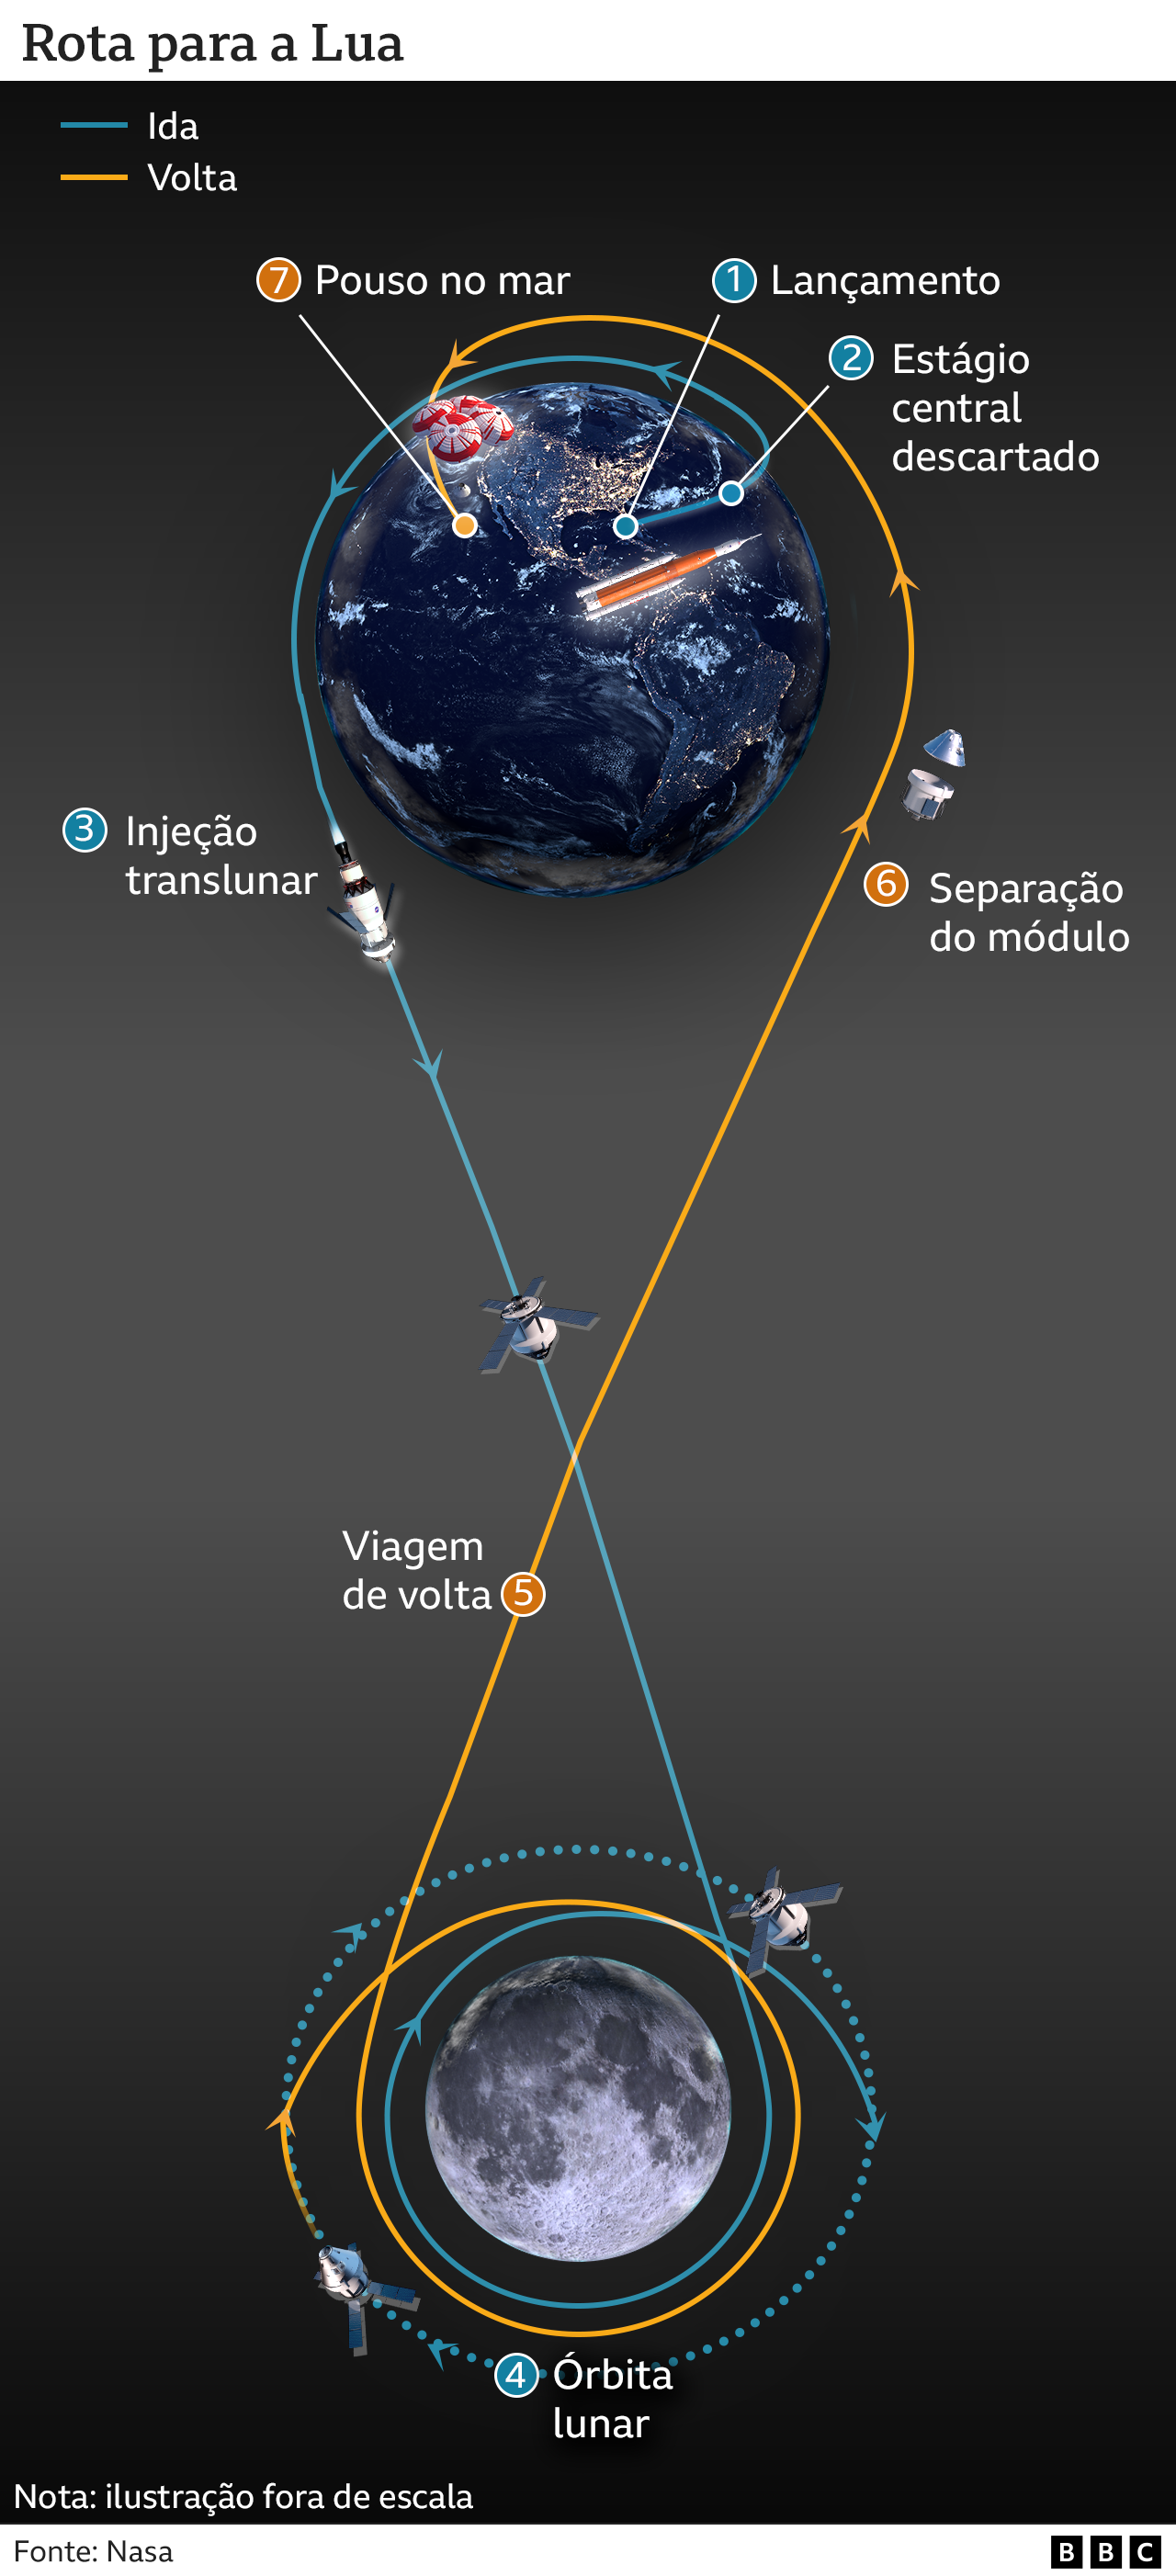 Infographic shows route of the Artemis mission to the Moon